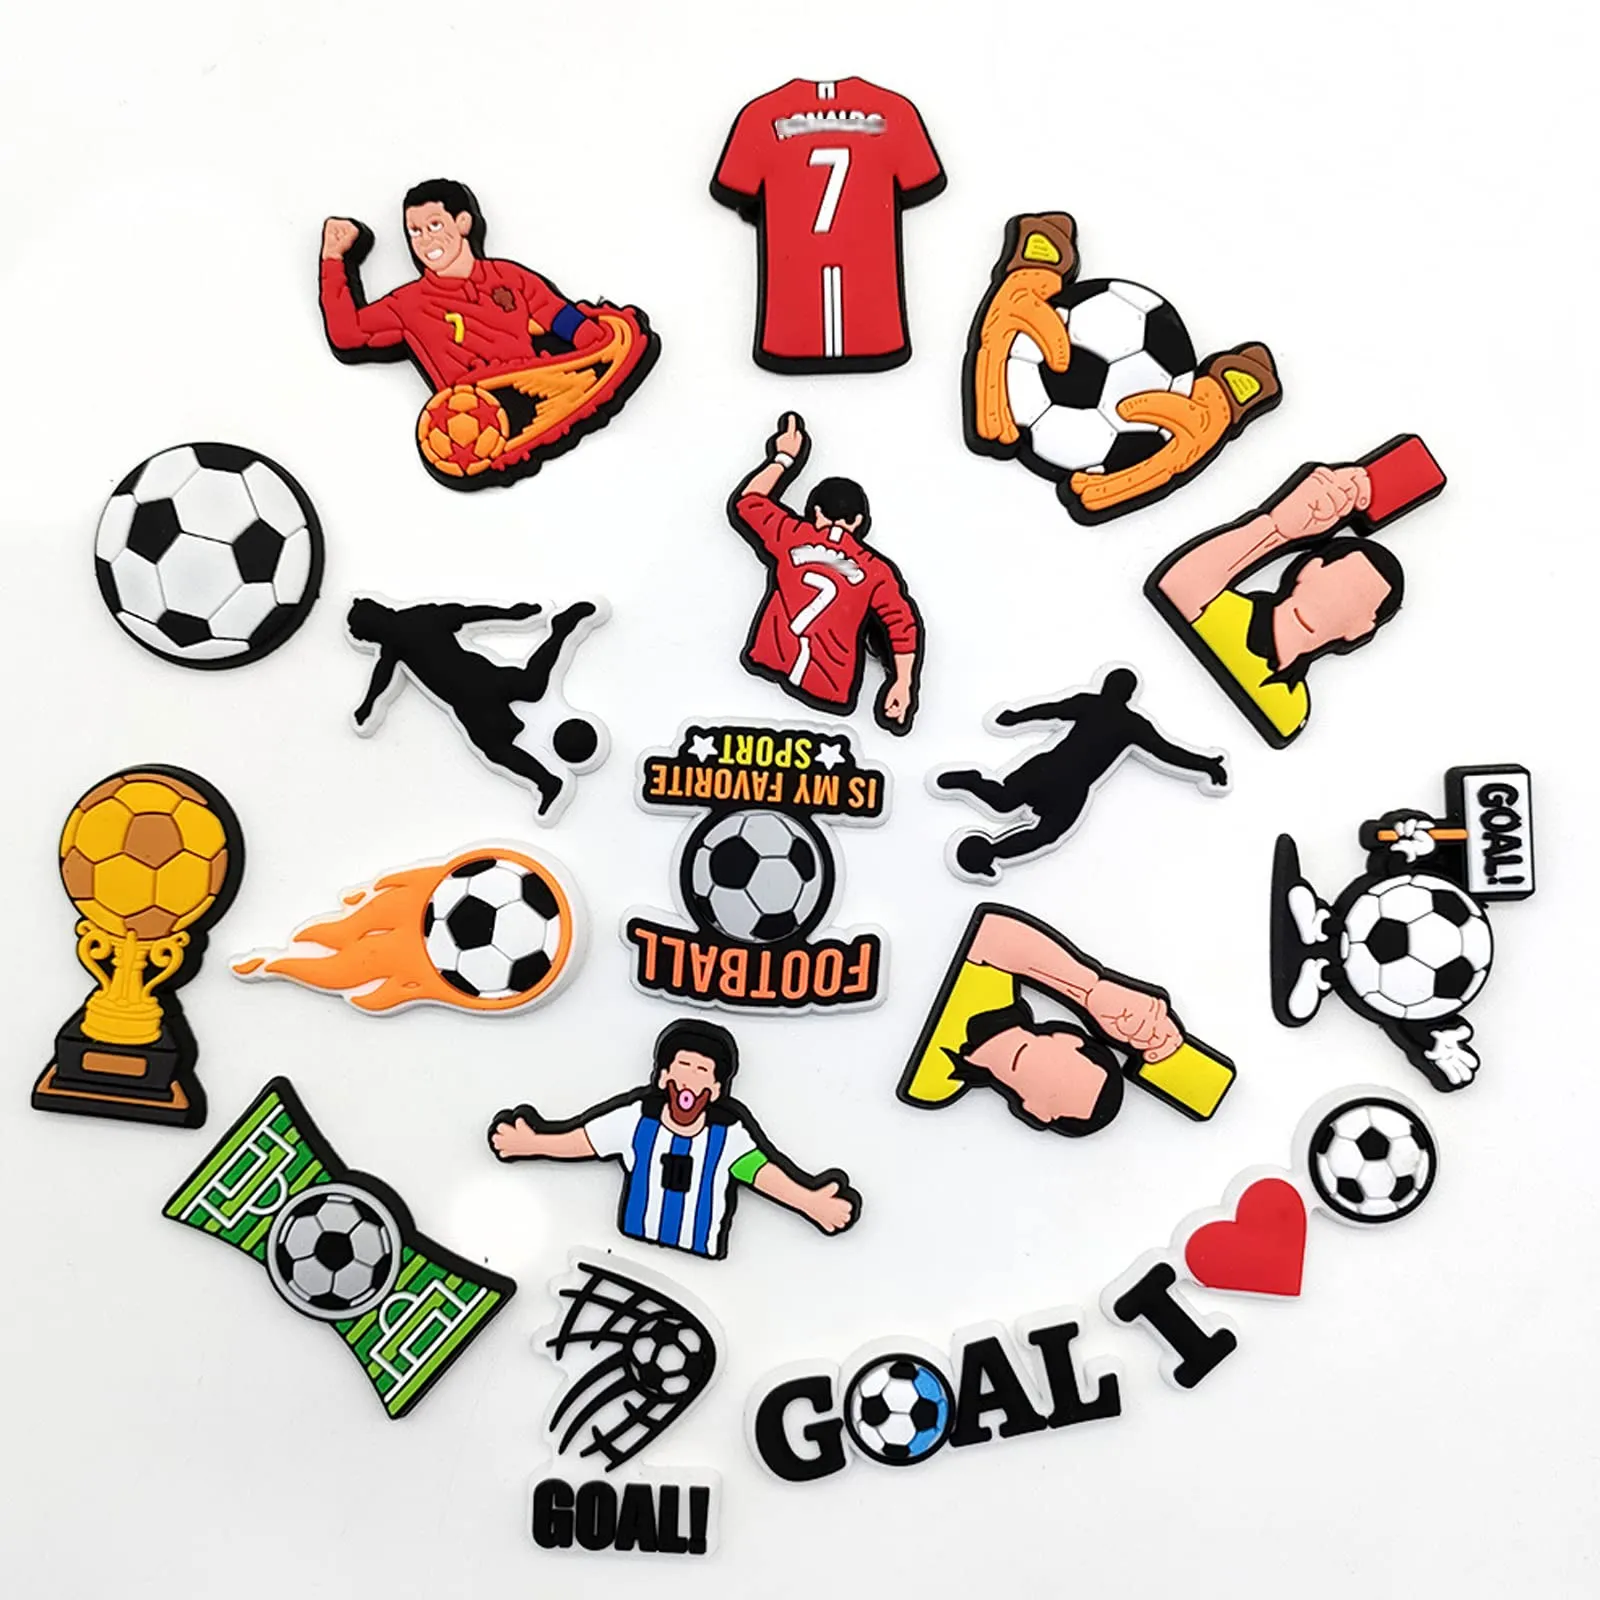 soccer croc charms for boys girls football croc charms pack men croc charms soccer football sports shoe charms cool croc pins soccer party favors soccer gifts world cup decorations